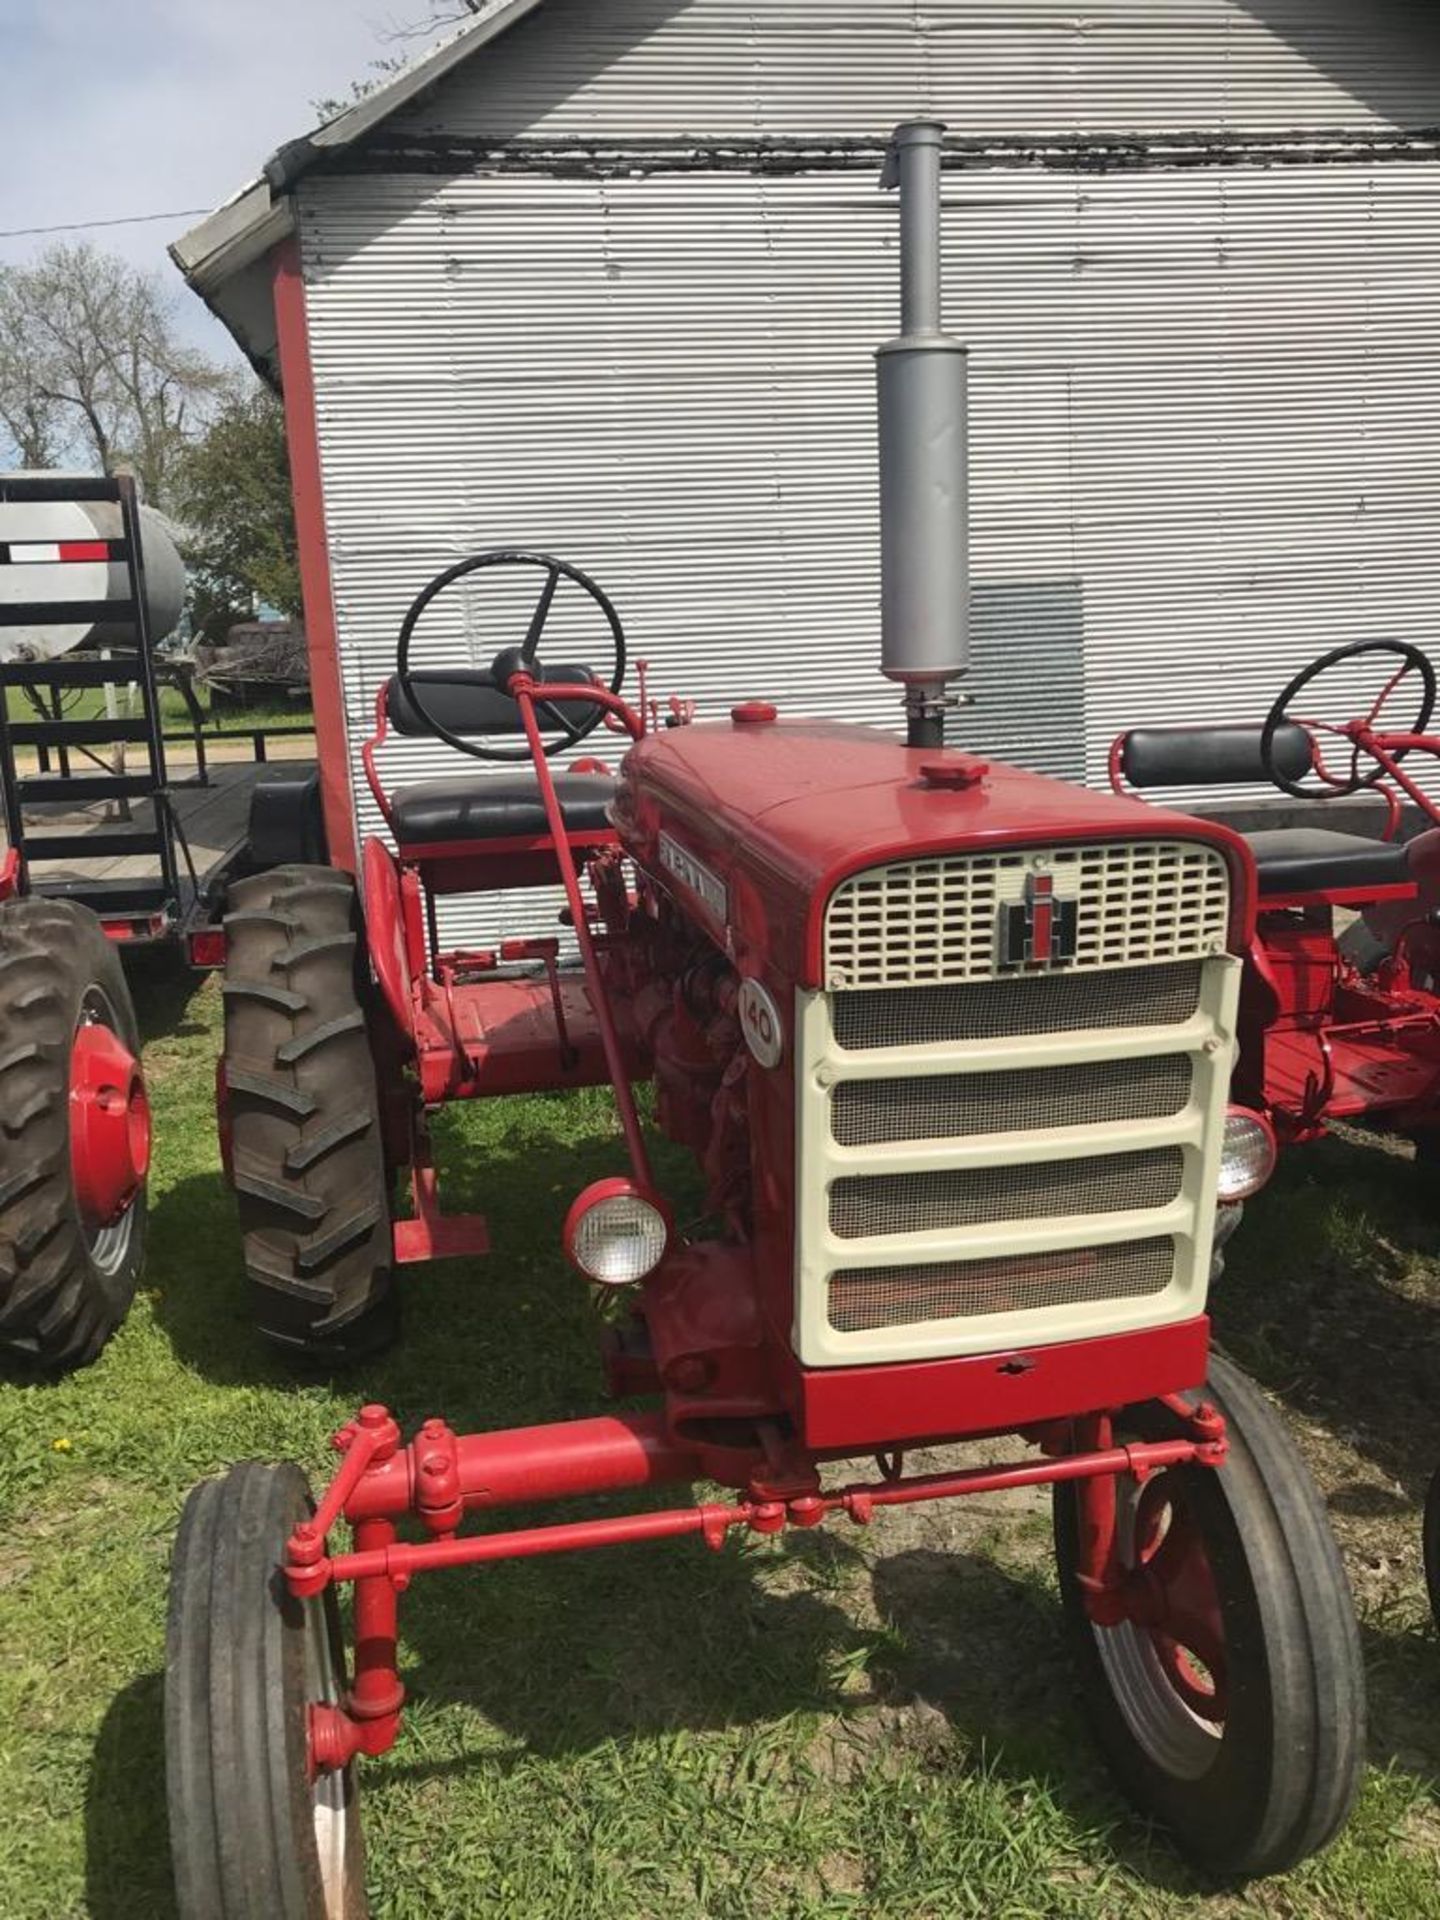 1958 Farmall 140, wide front, HYD, new tires - Image 2 of 3